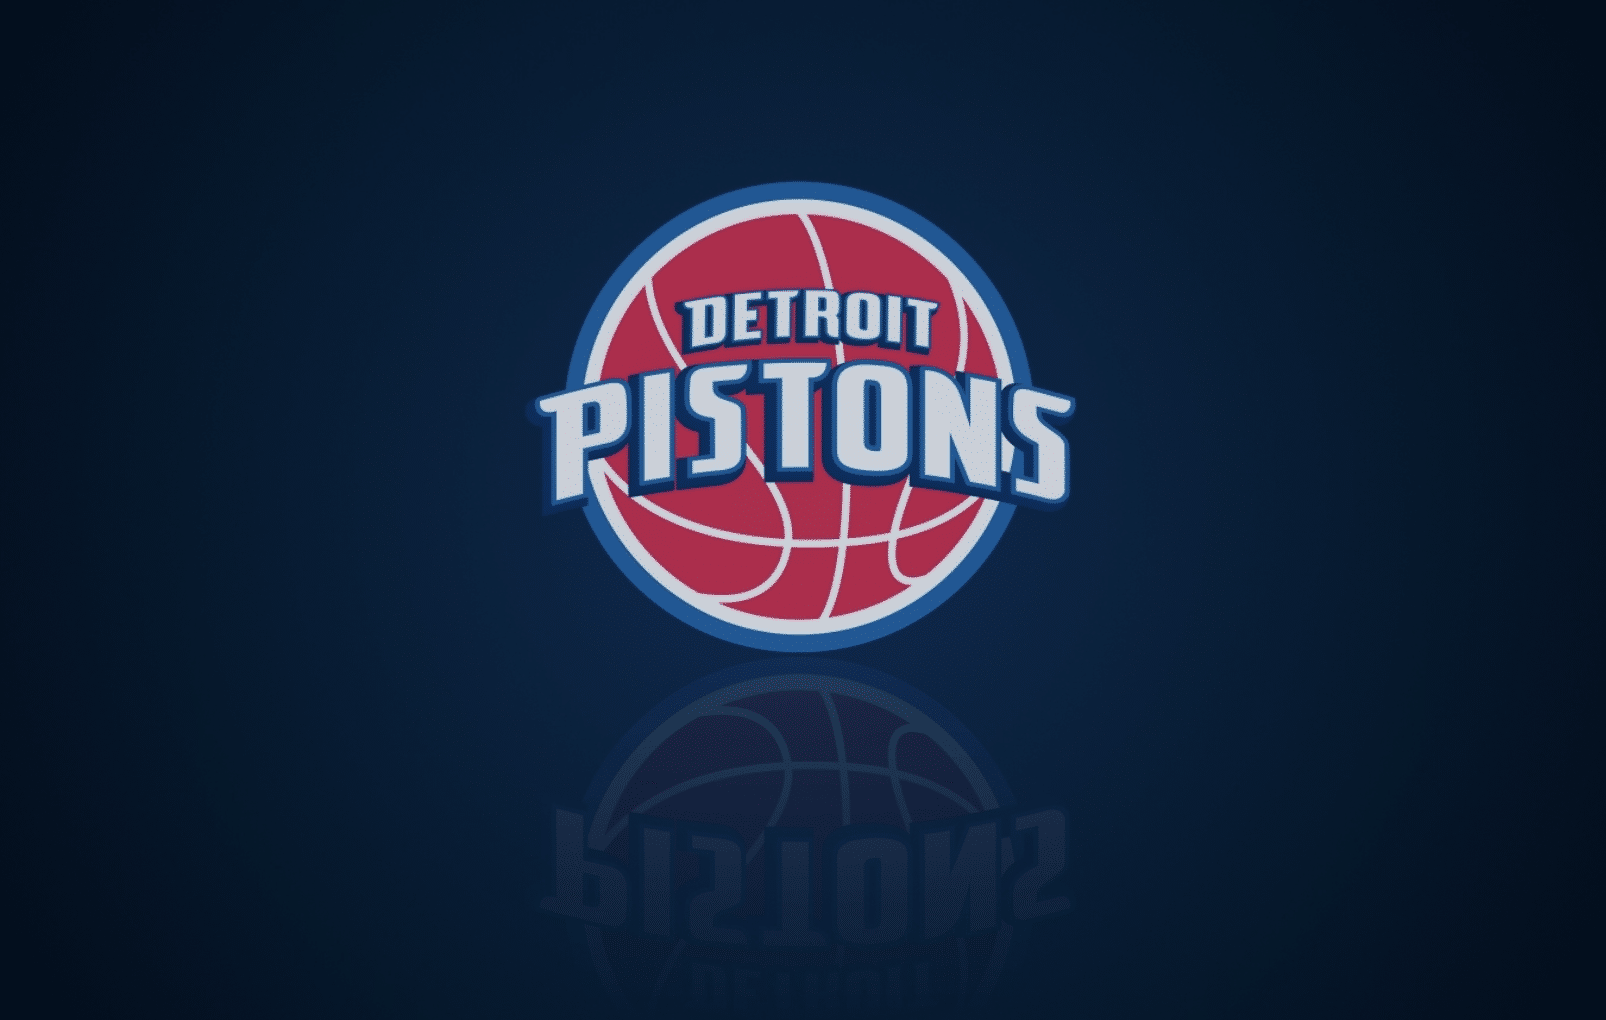 Detroit Pistons face setback Will Bynum Convicted Monty Williams says Detroit Pistons 20th straight loss 'Hurts like you can't believe' NBA Forcing Detroit Pistons to Play Extra Road Game